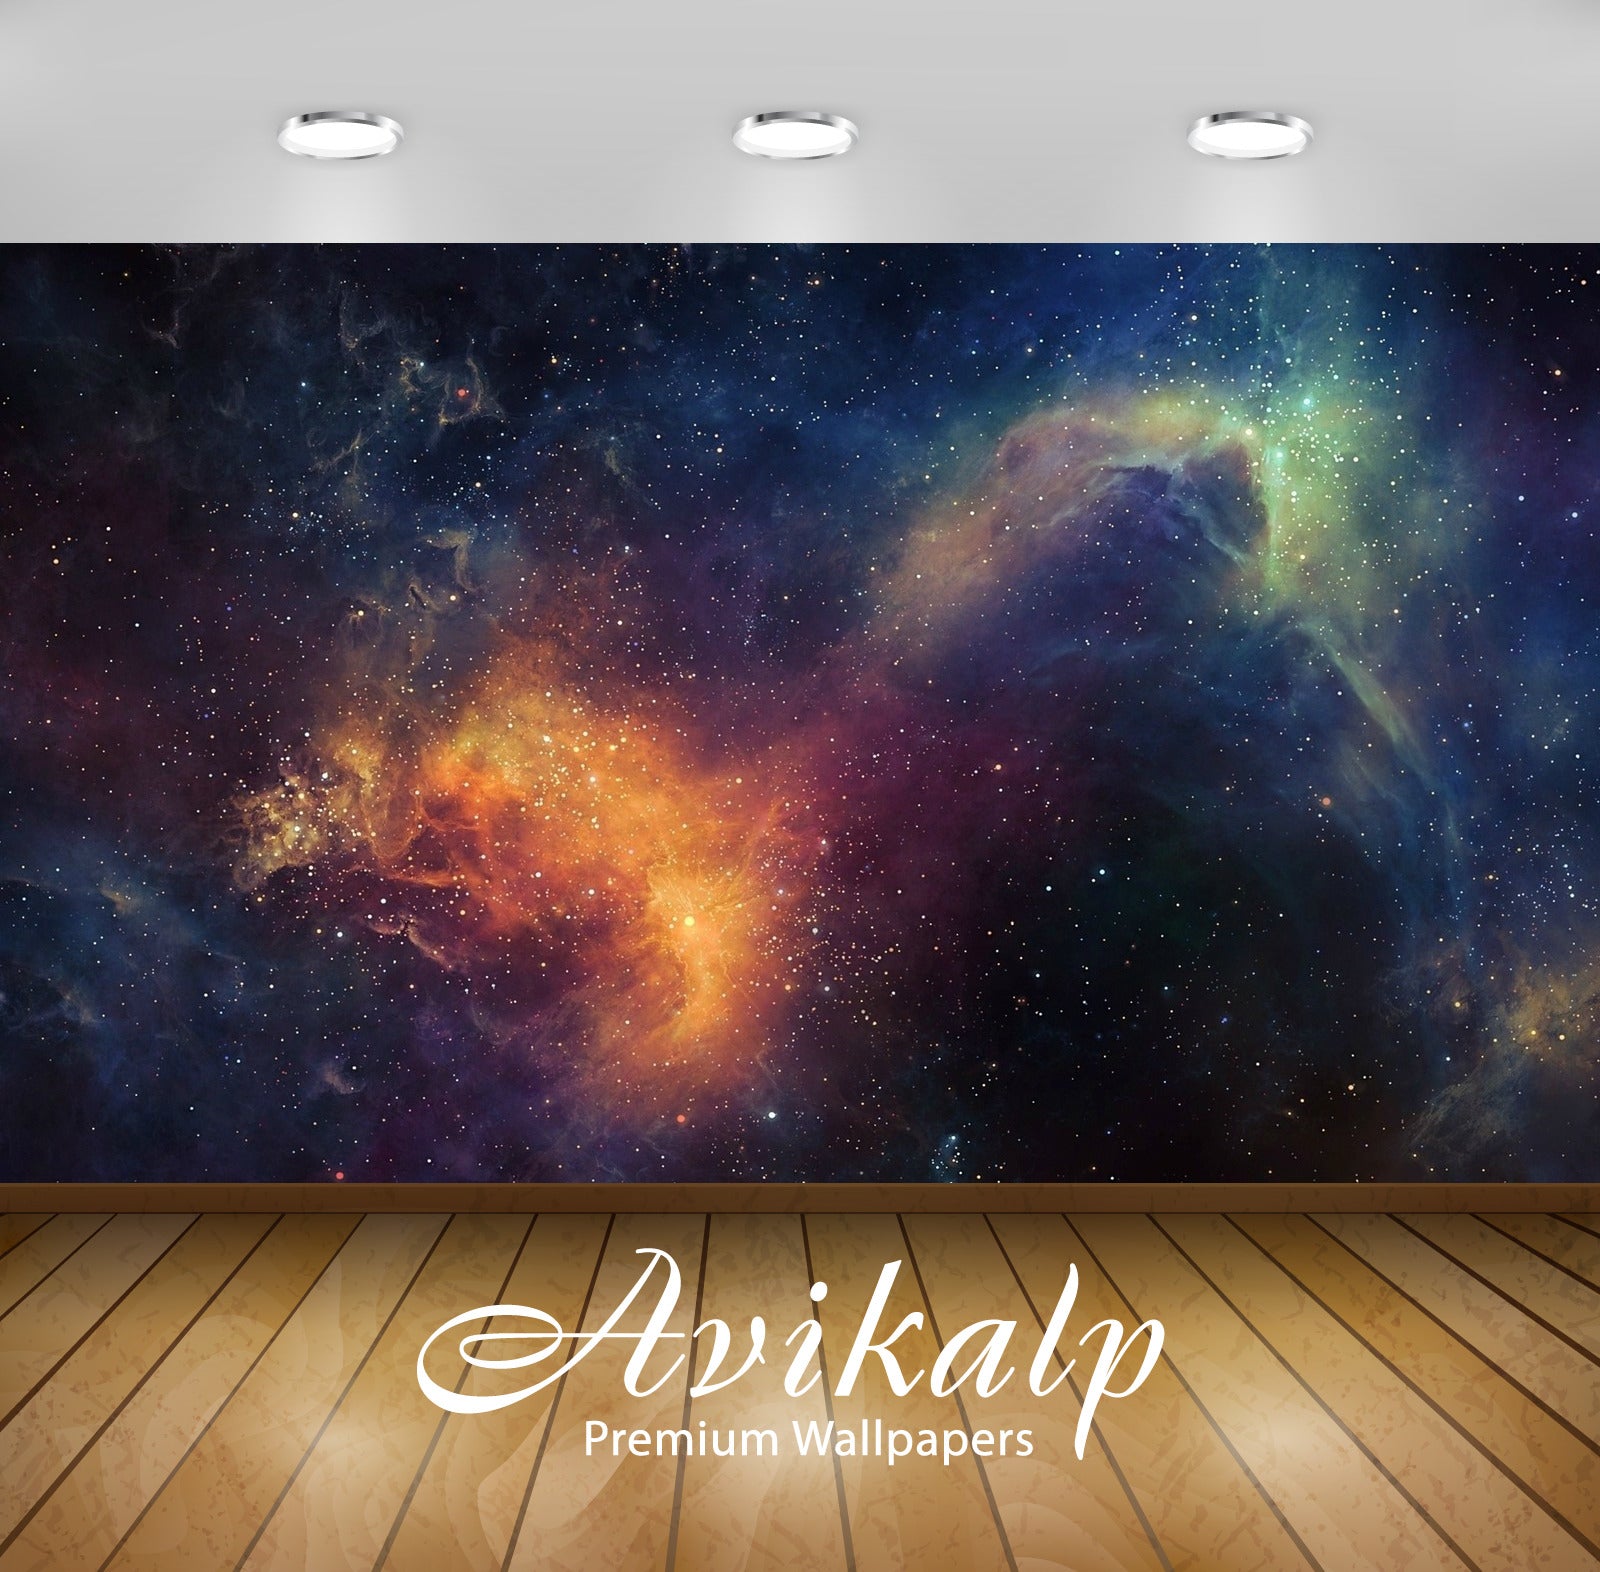 Avikalp Exclusive Awi1817 Space Abstract Full HD Wallpapers for Living room, Hall, Kids Room, Kitche